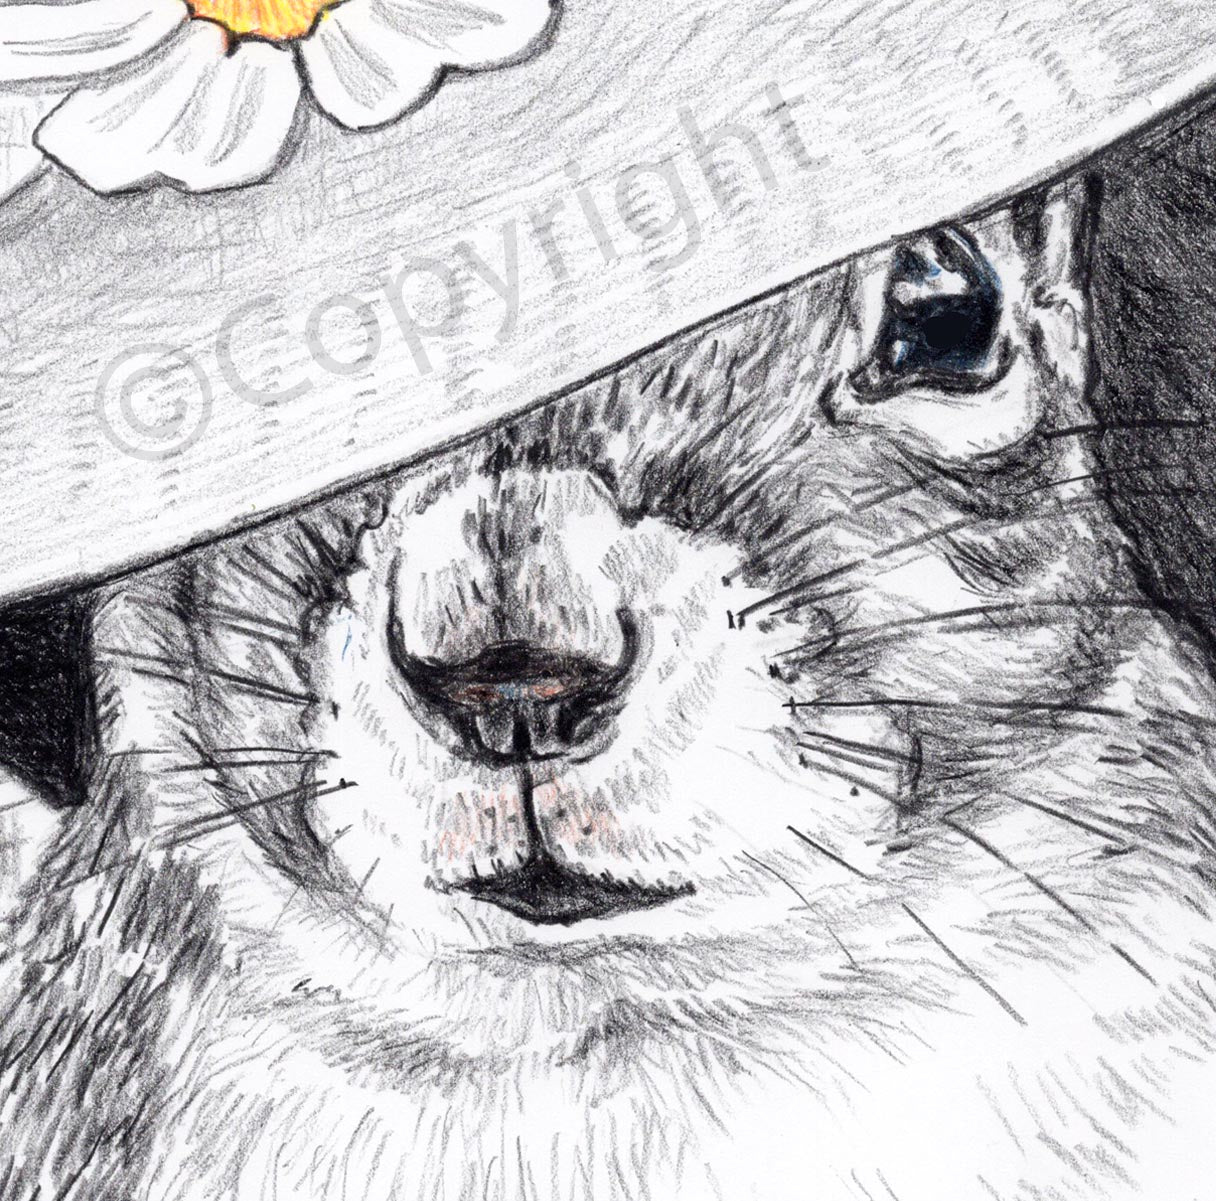 Crayon drawing of a squirrel wearing a big floppy sun hat with a daisy on the brim. Art by Deidre Wicks